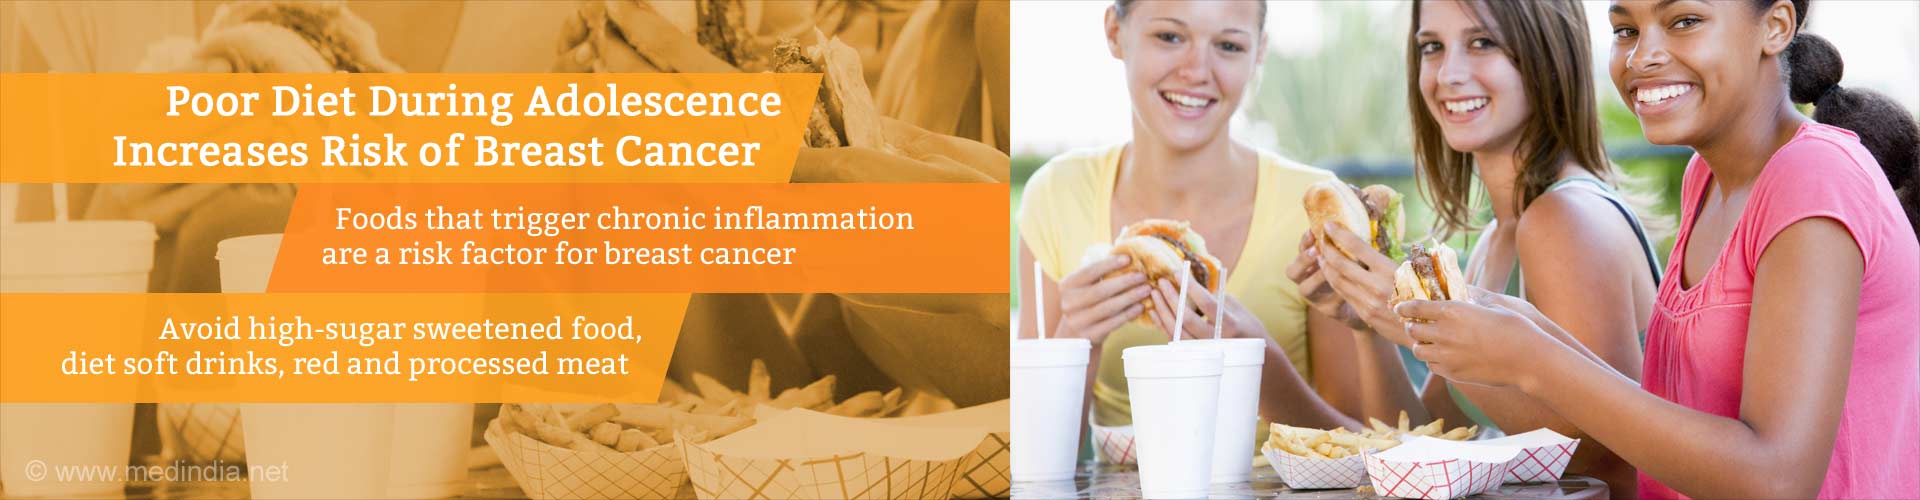 Poor Diet During Adolescence Increases Risk of Breast Cancer
- Foods that trigger chronic inflammation are a risk factor for breast cancer
- Avoid high-sugar sweetened food, diet soft drinks, red and processed meat
